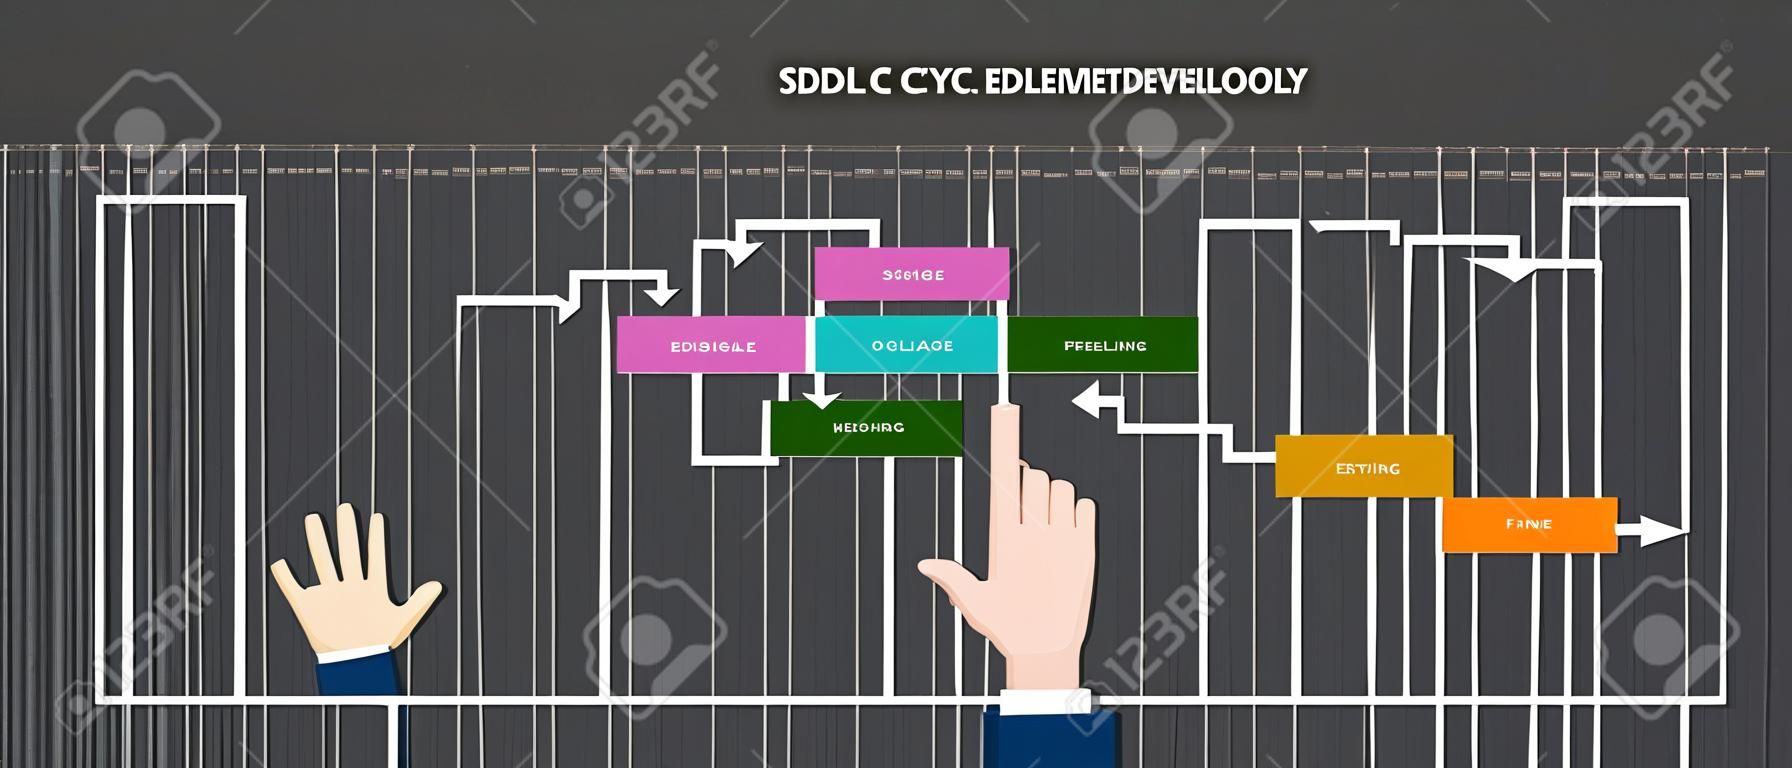 water fall SDLC system development life cycle methodology software concept